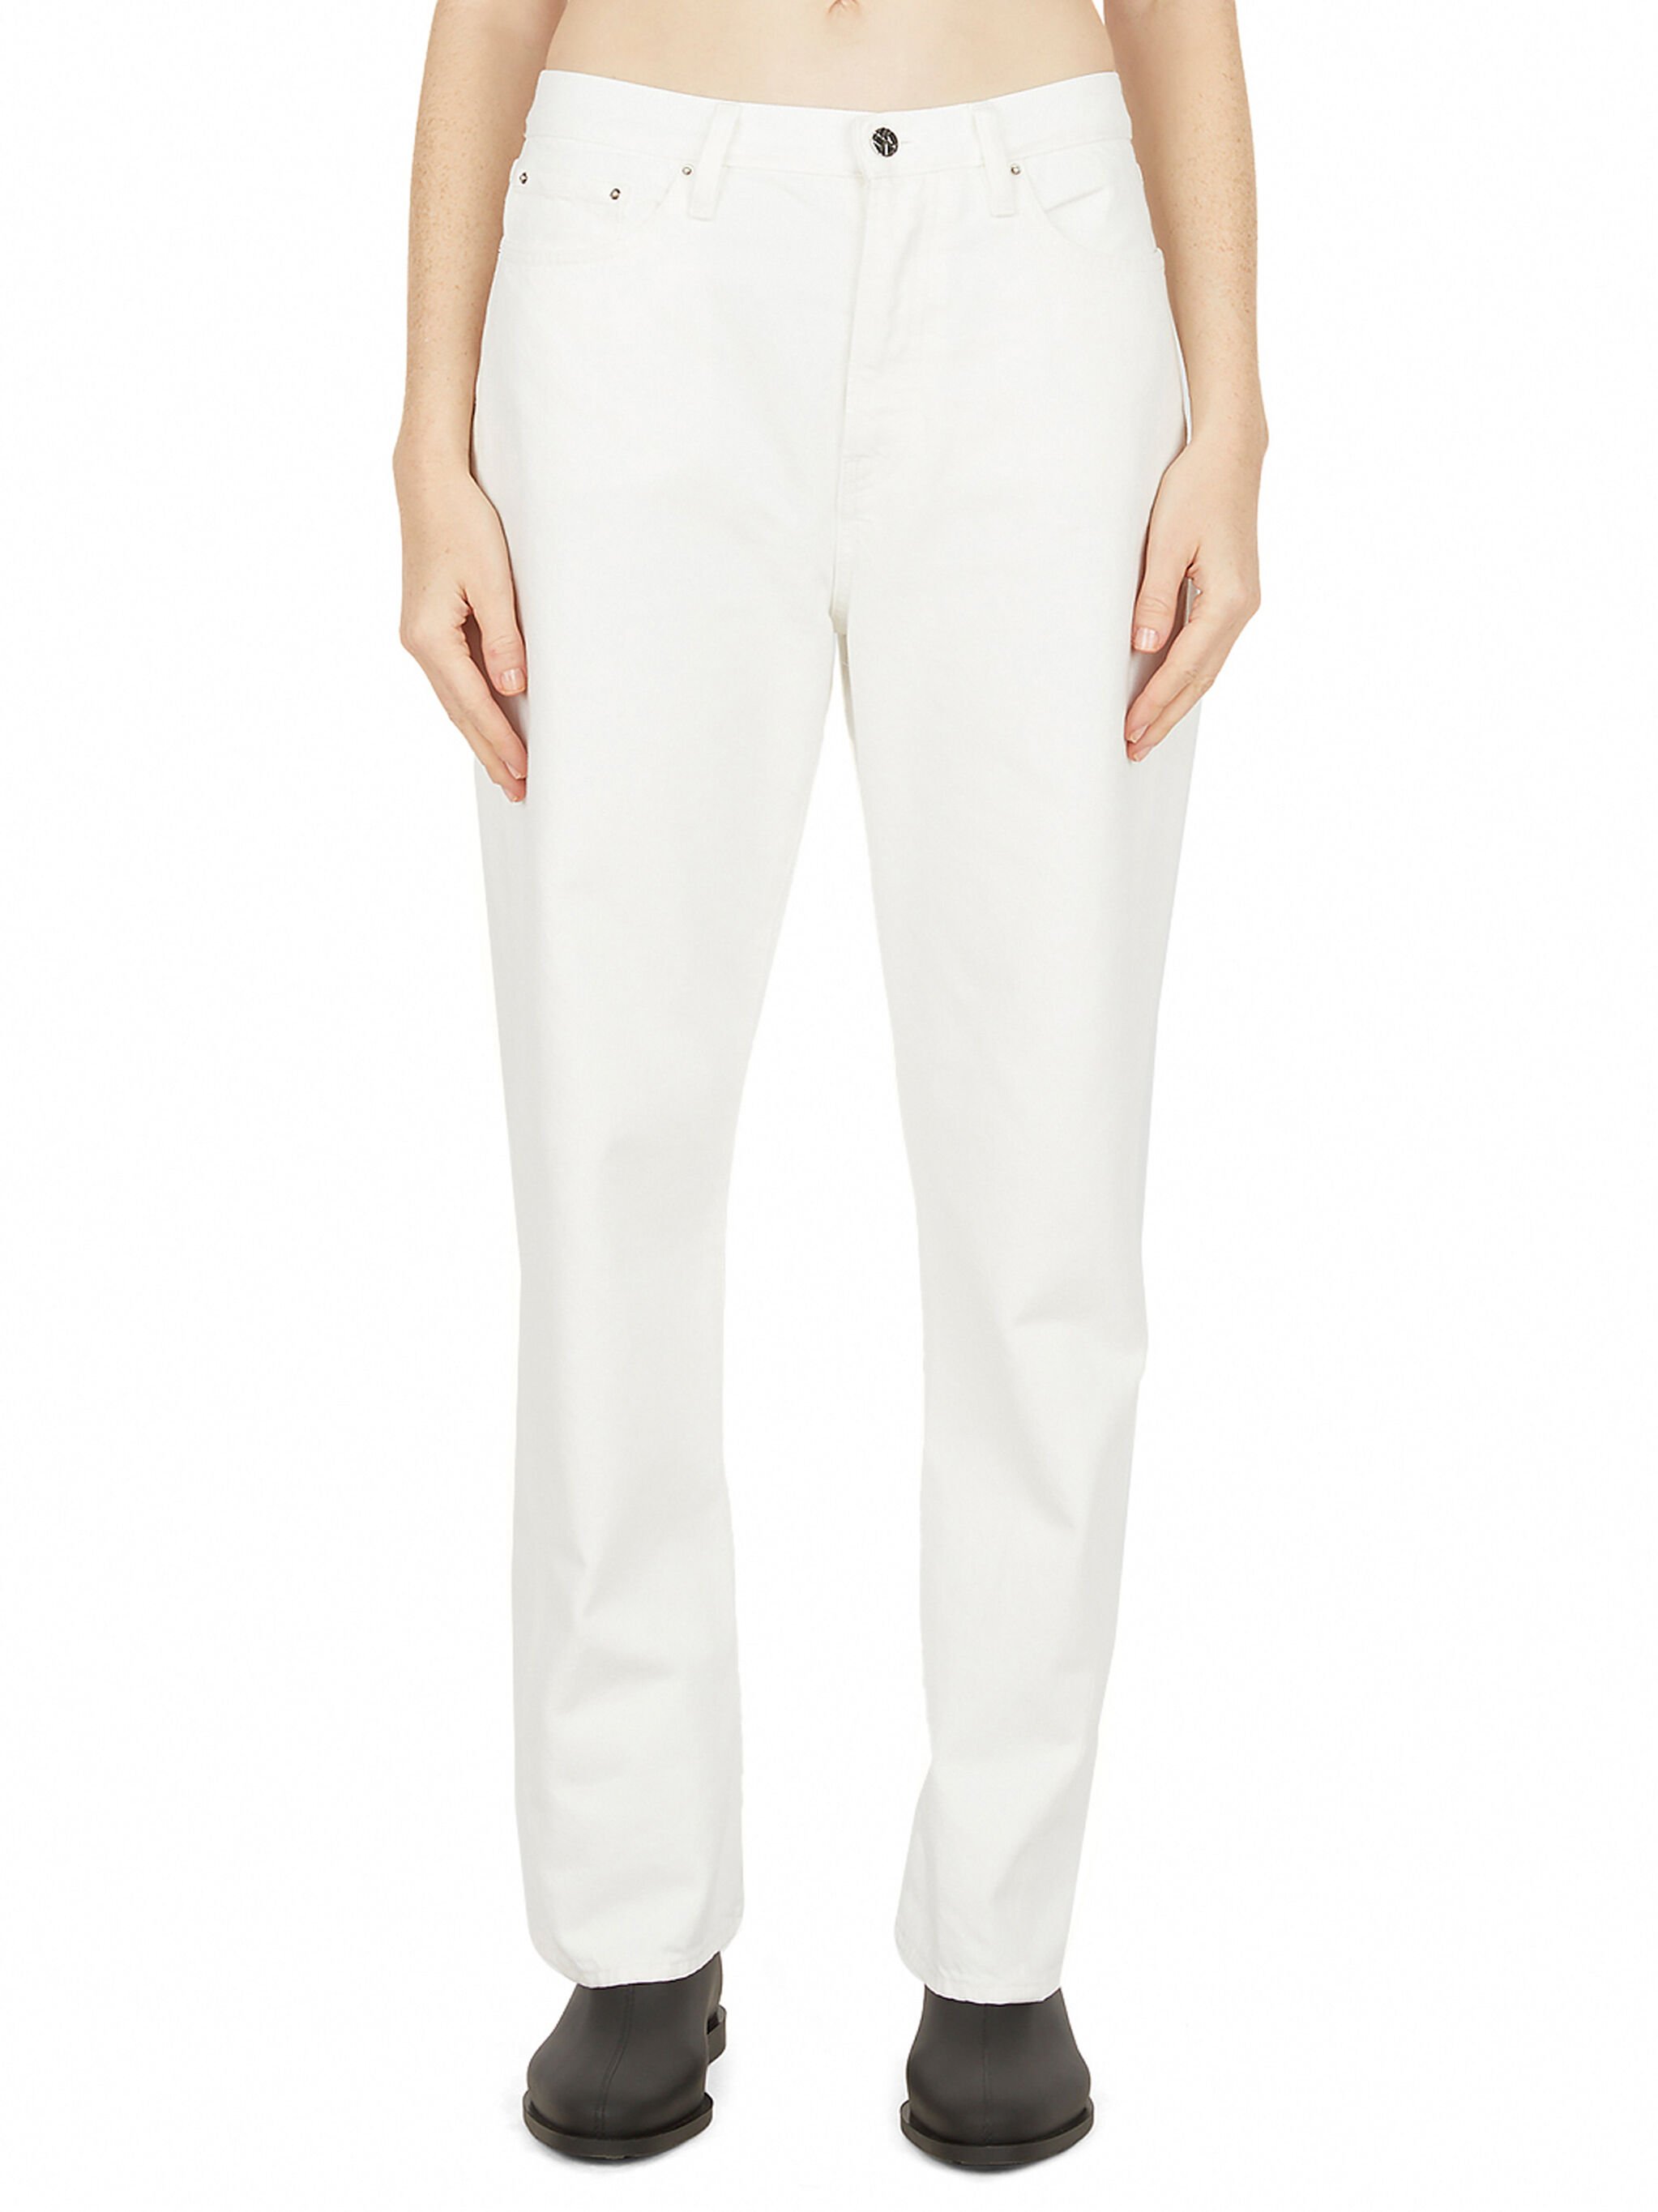 TOTEME White Twisted Seam Jeans